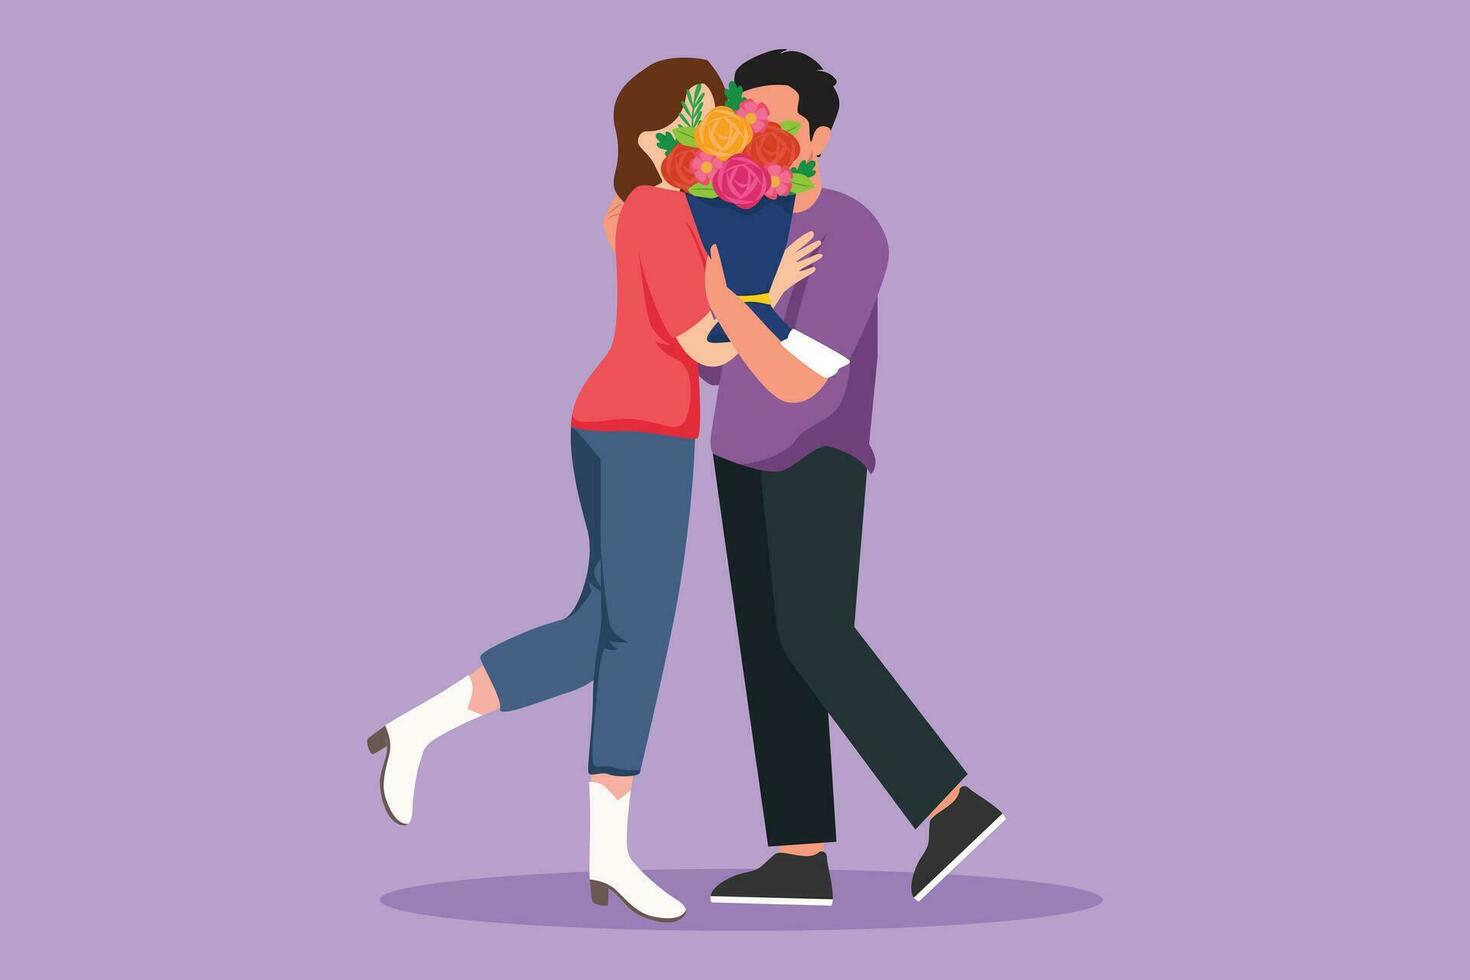 Graphic flat design drawing young romantic couple hugging and kissing each other behind bouquet of flowers. Happy man and cute woman celebrating wedding anniversary. Cartoon style vector illustration